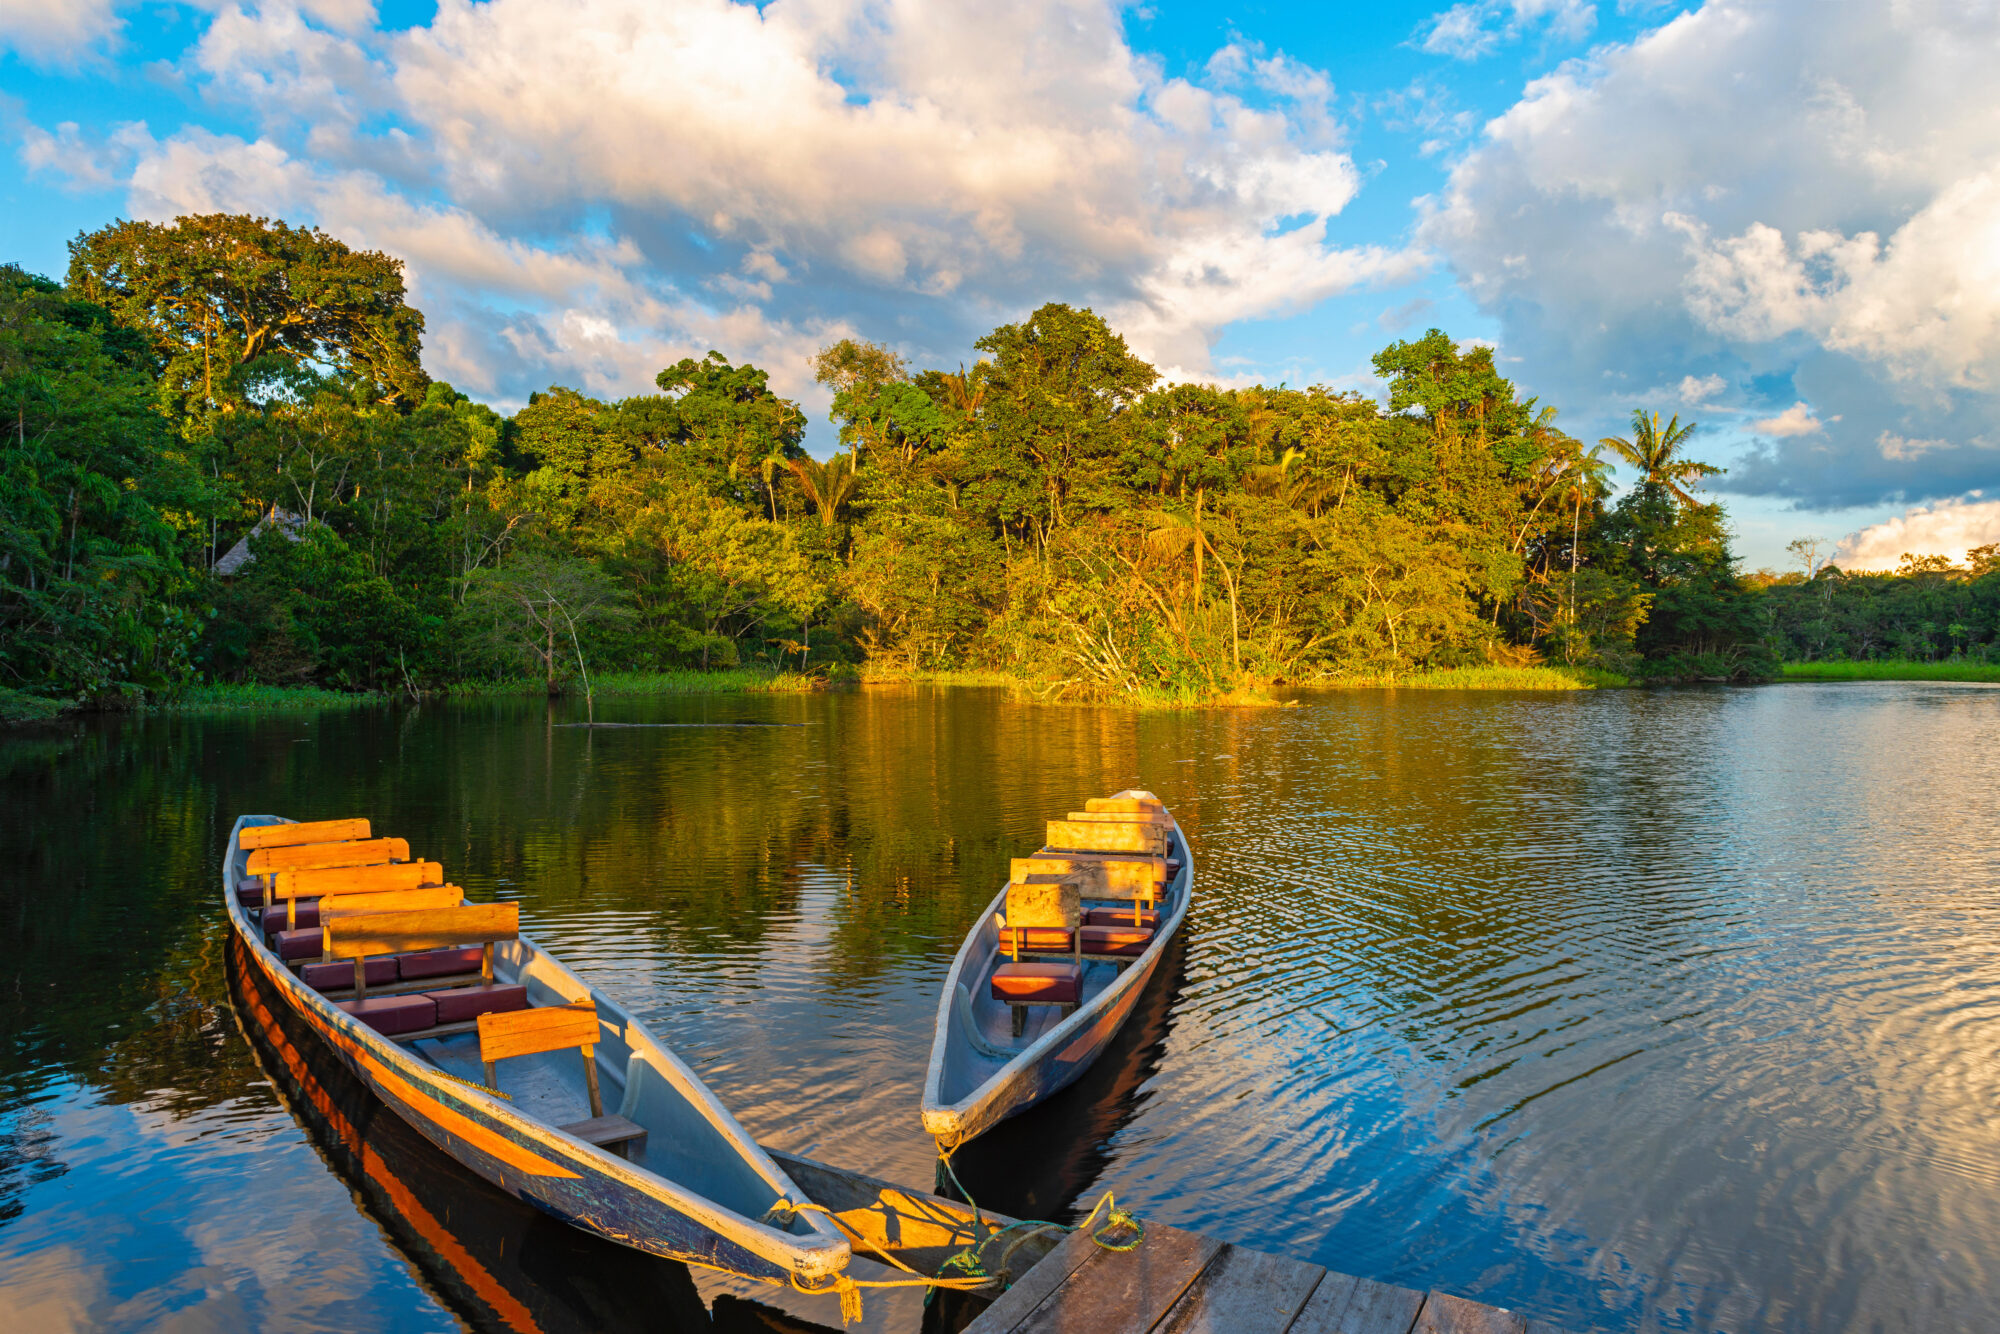 Two traditional wooden canoes at sunset in the Amazon River Basin